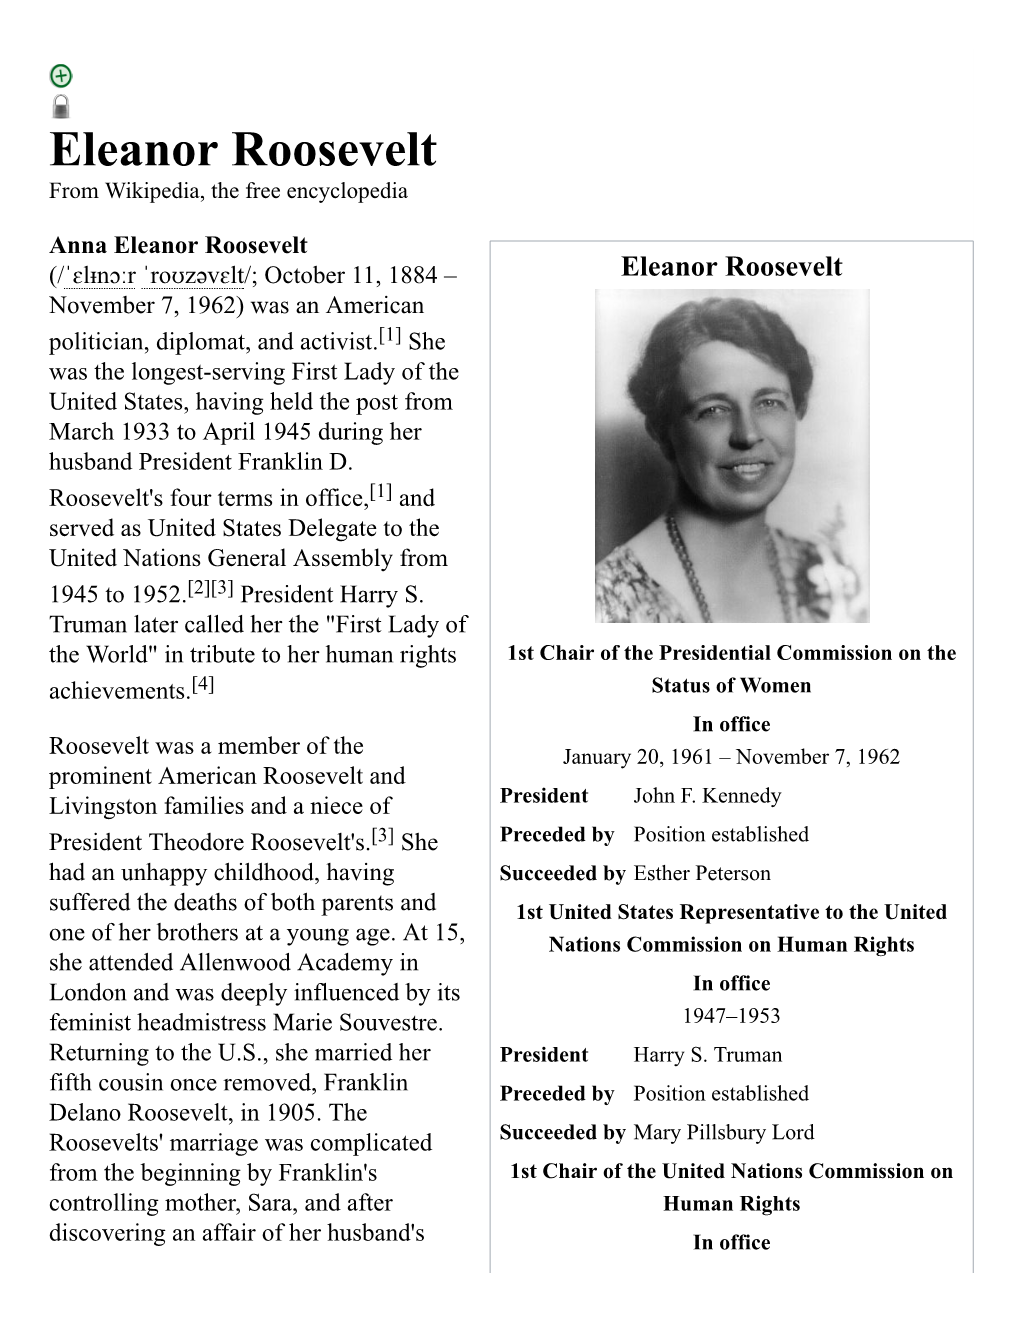 Eleanor Roosevelt from Wikipedia, the Free Encyclopedia